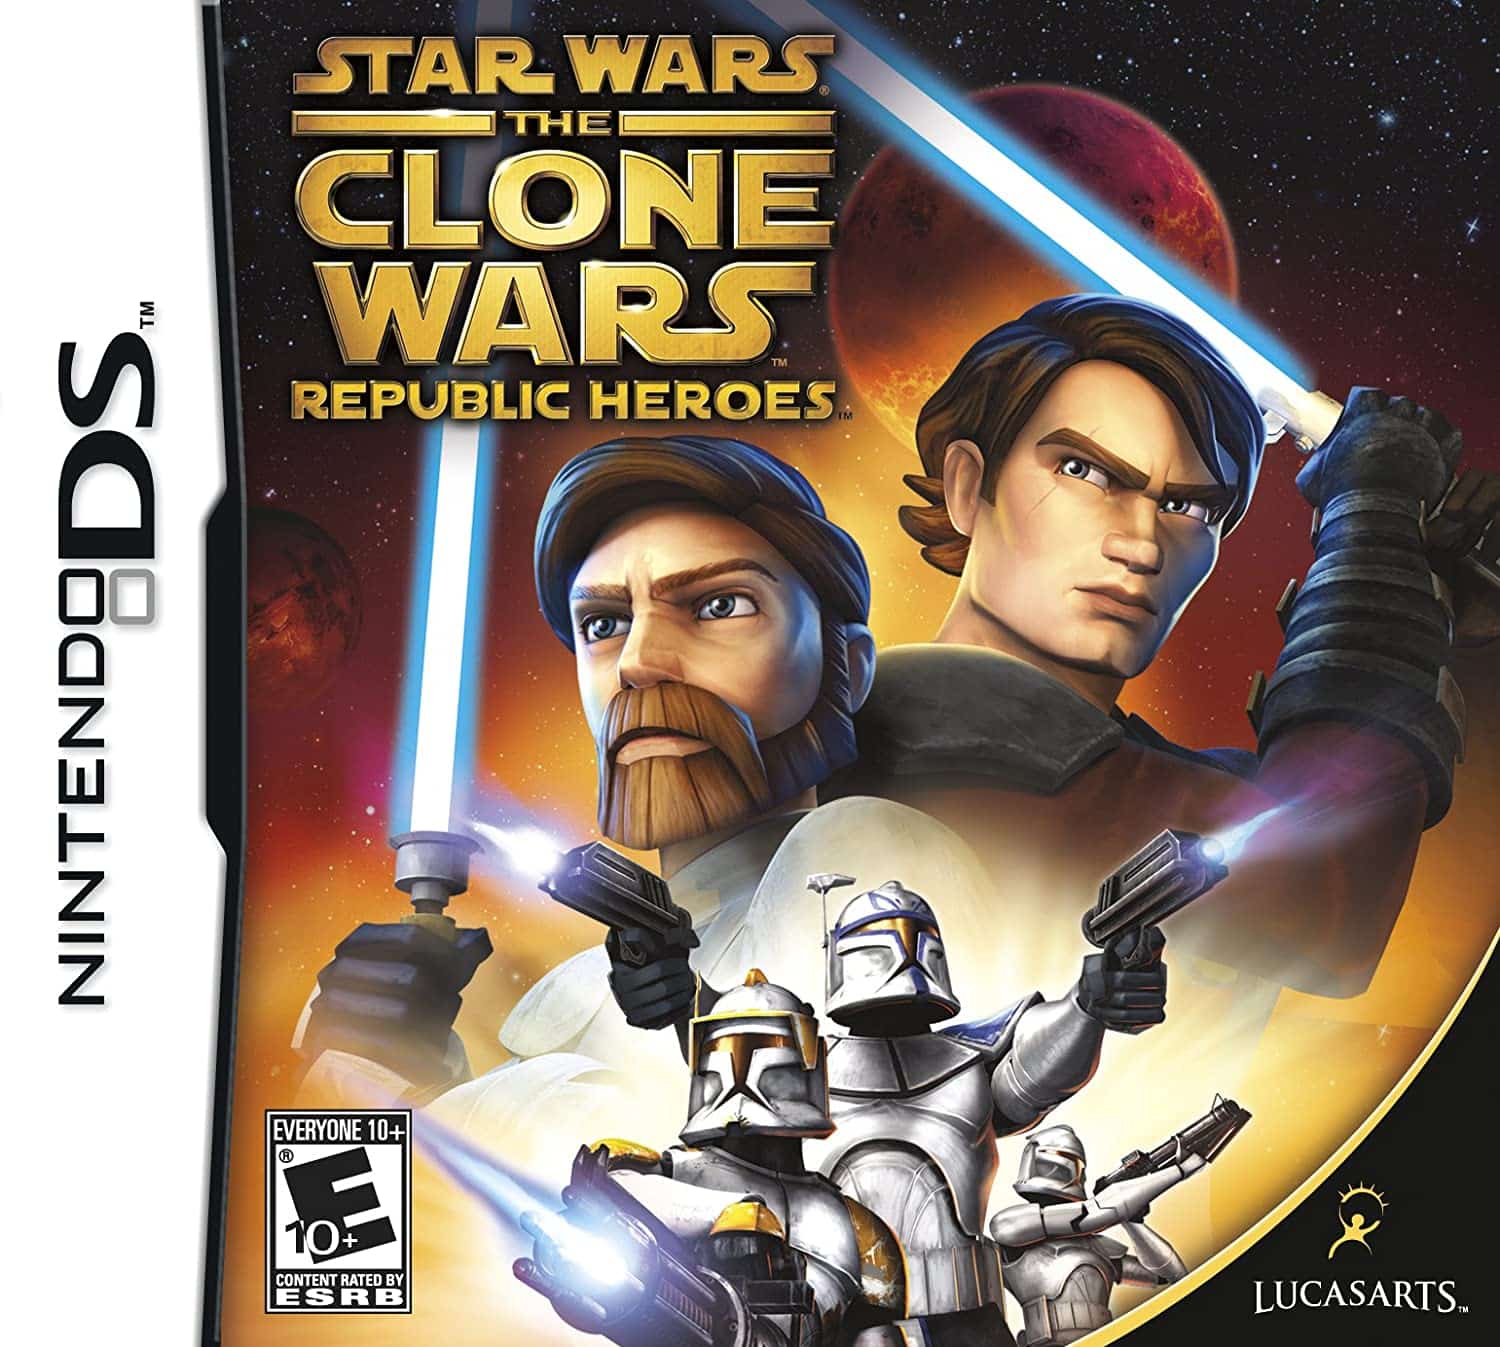 Star Wars: The Clone Wars – Republic Heroes player count stats